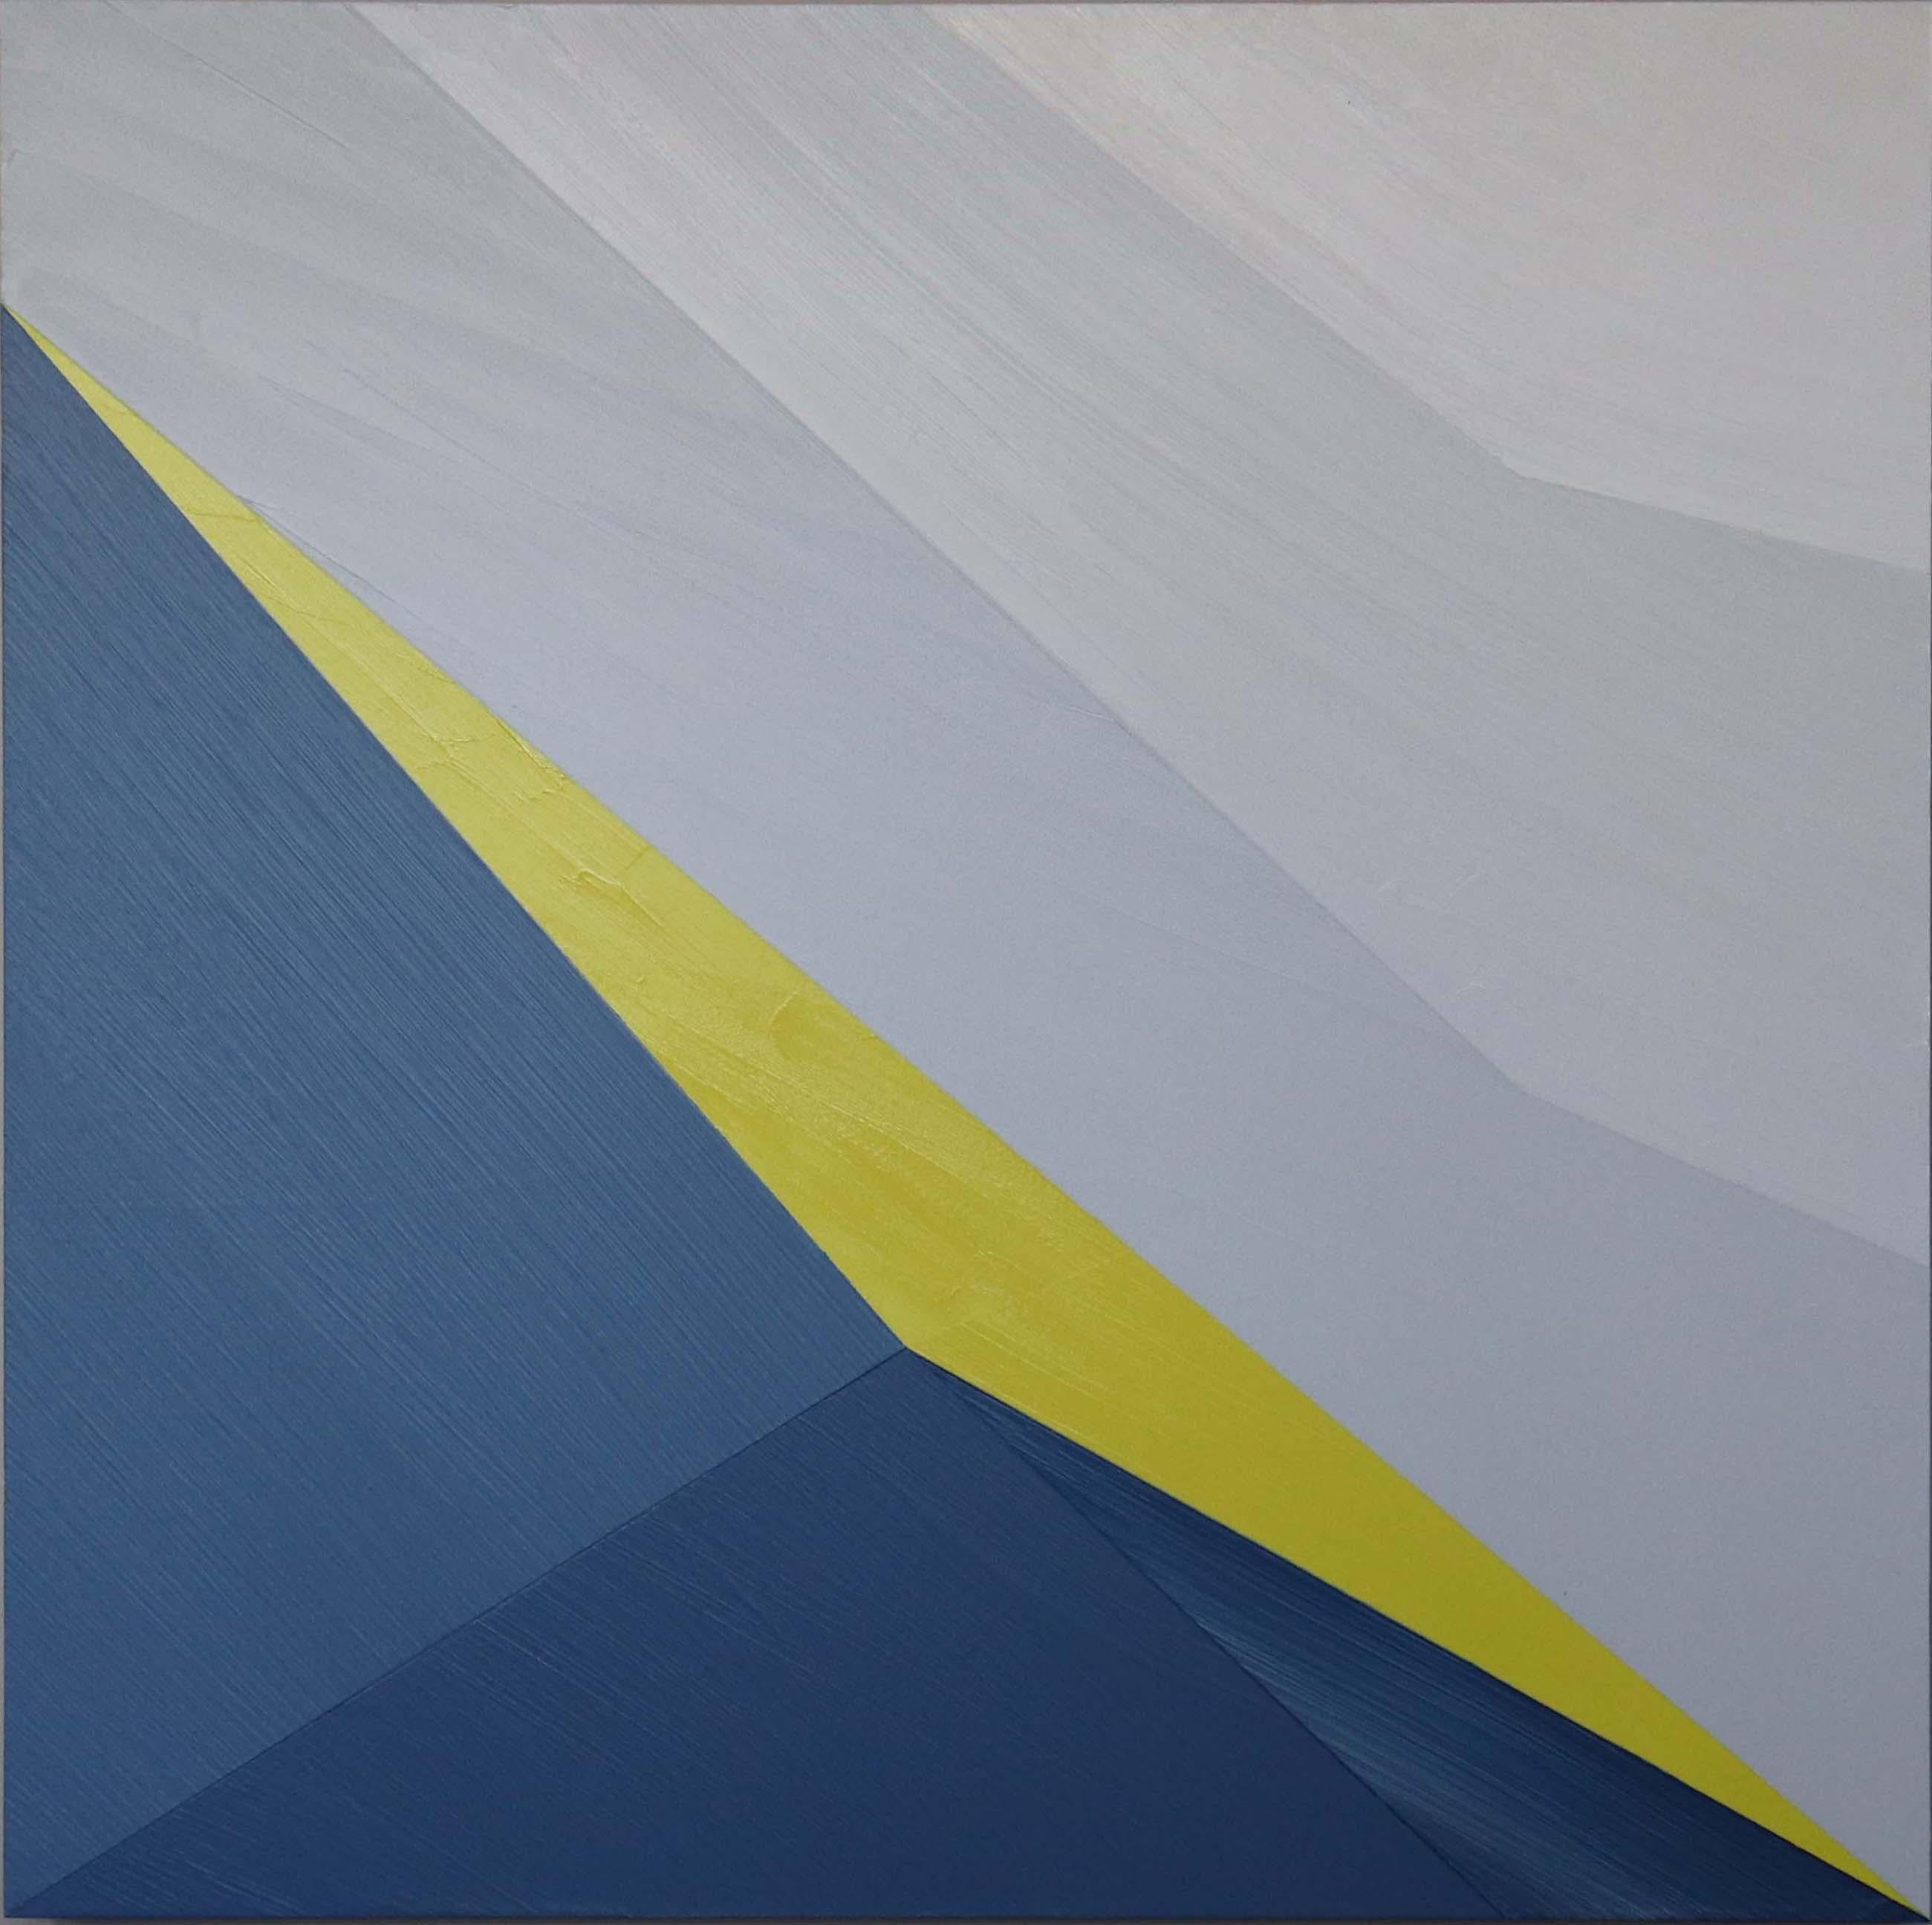 This acrylic on panel painting by Bryan Boone is the second in a series of balanced oppositional design. The 24" x 24" square panel is a color field painting of blues, yellow, grey and white with colors blocked in a diagonal geometric